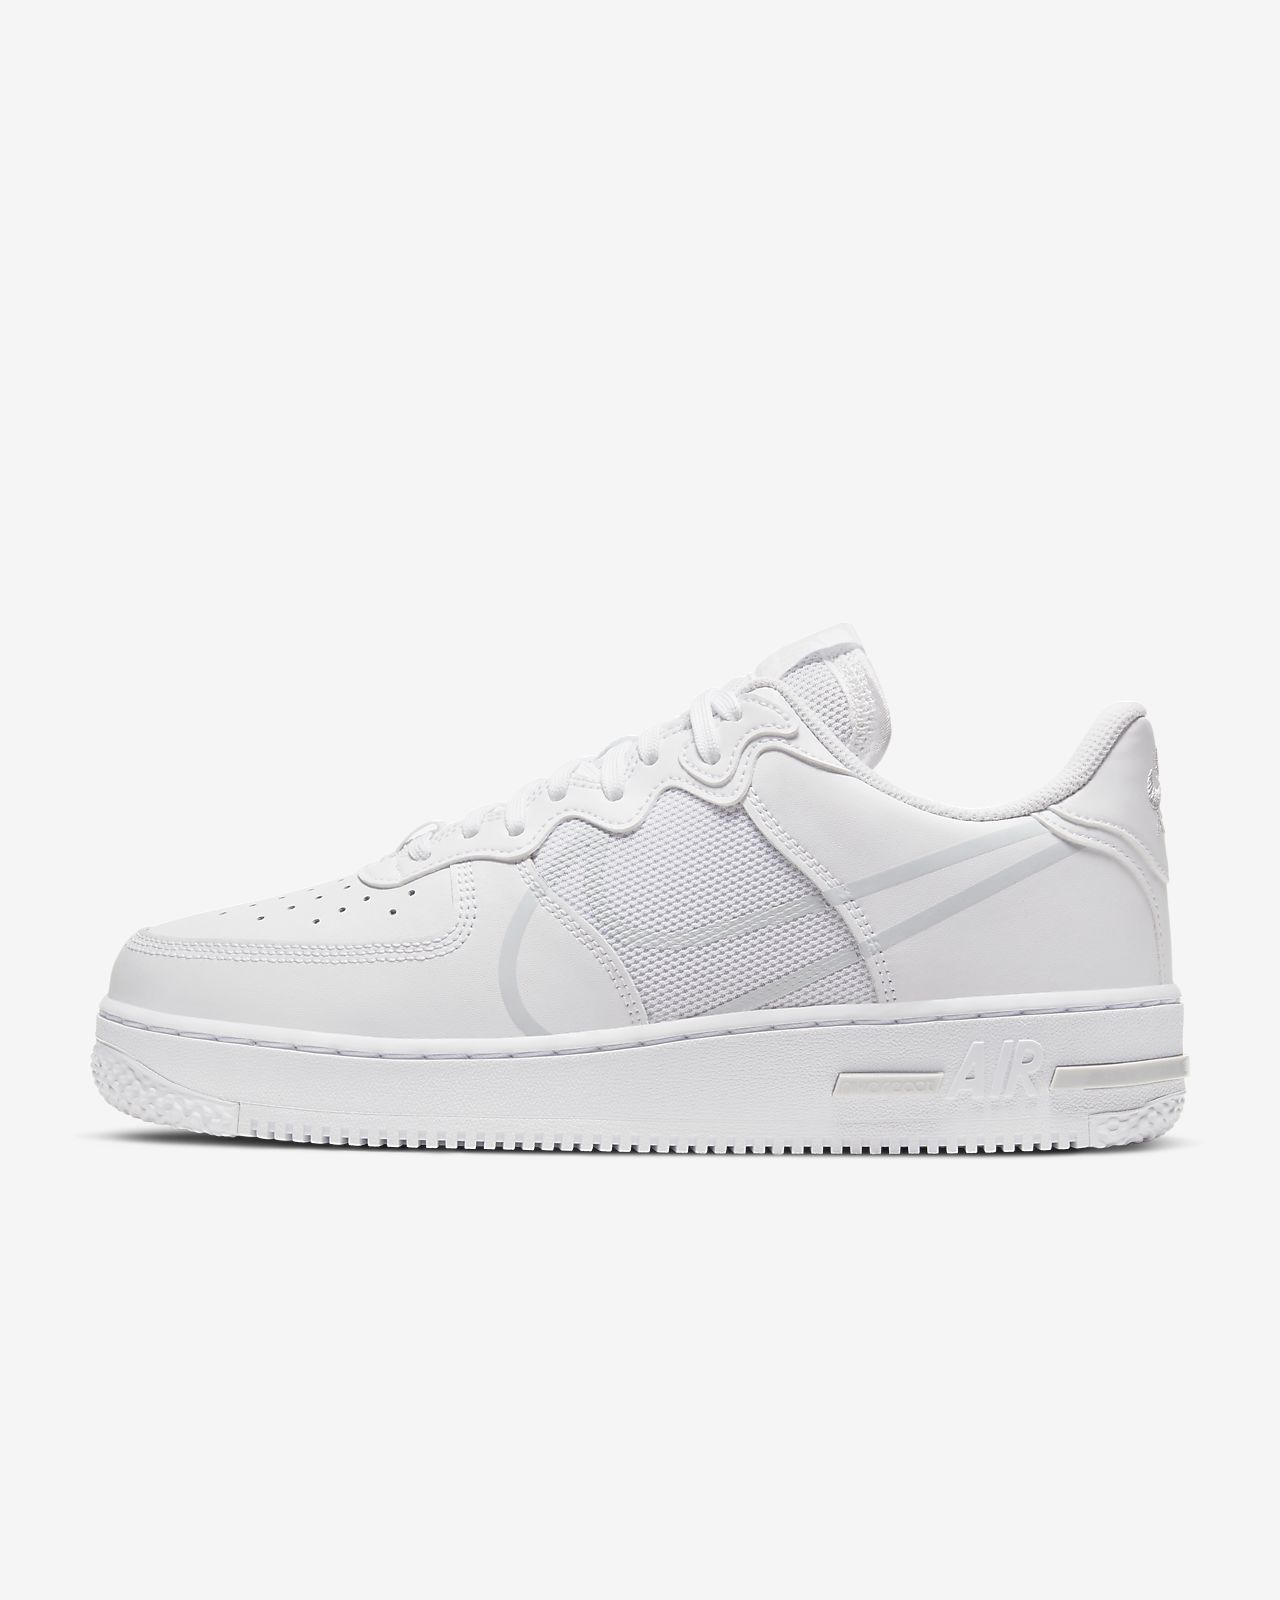 Nike Air Force 1 React (White) - SNKRS WORLD